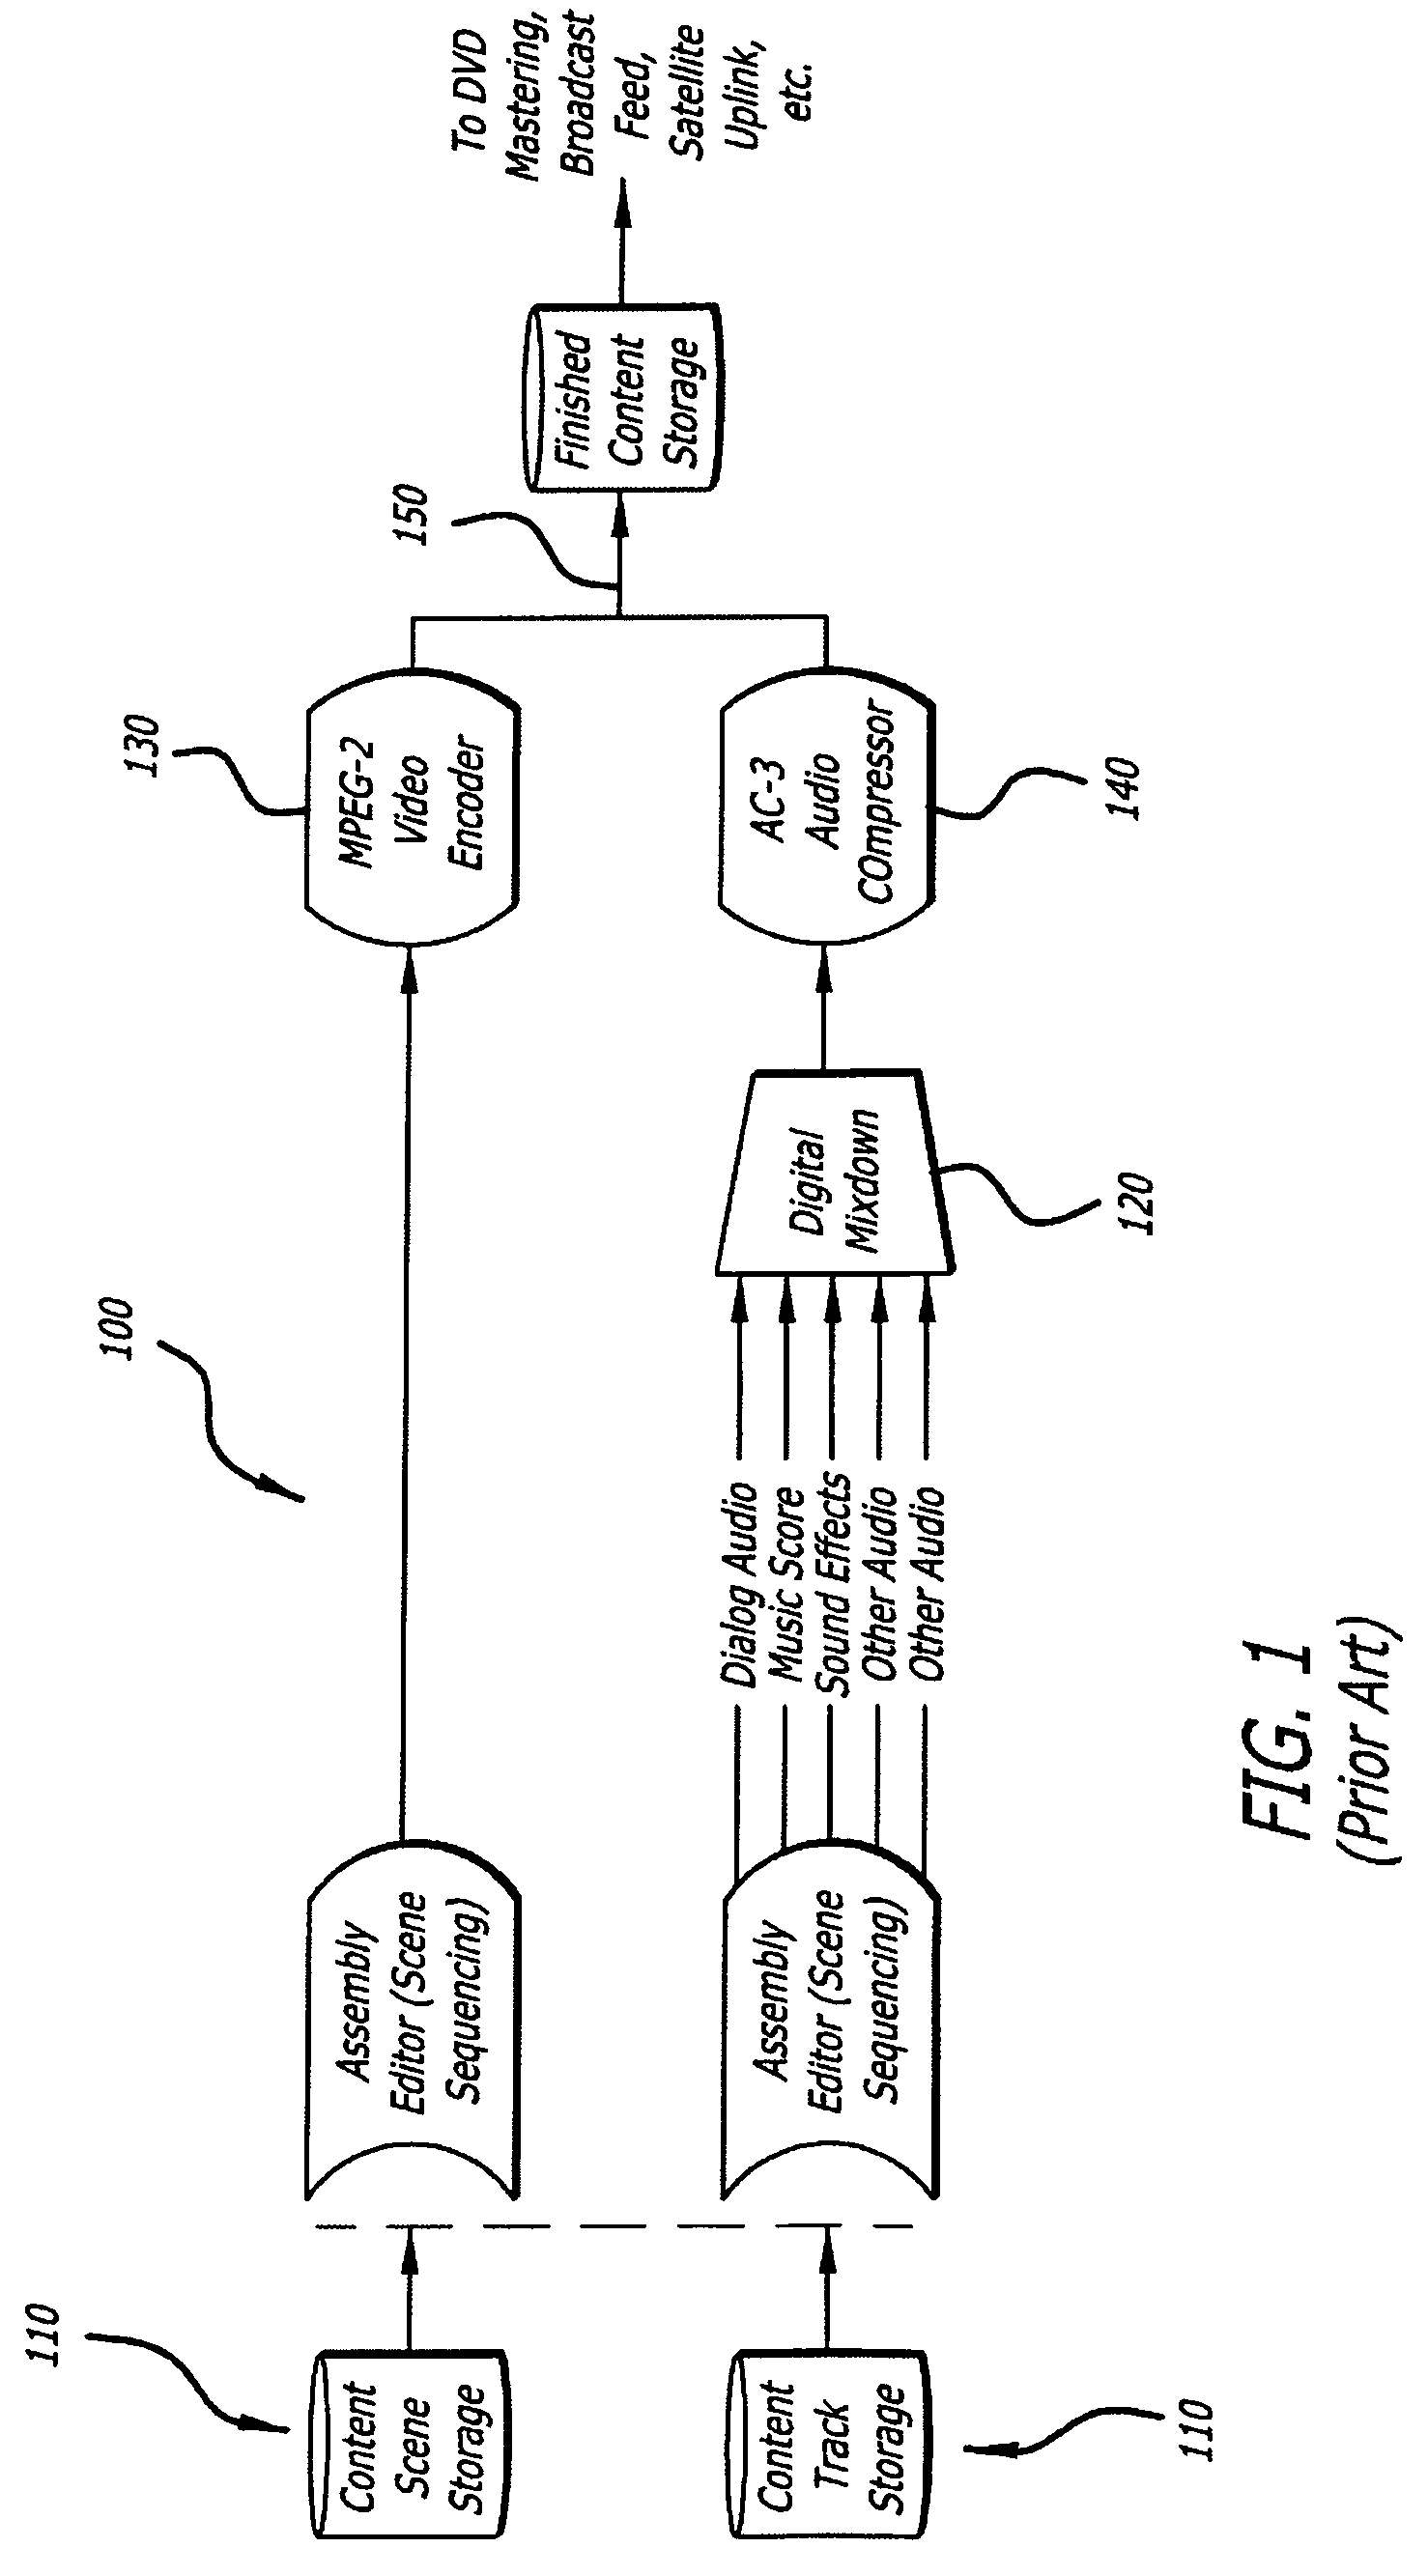 System and method for the creation, synchronization and delivery of alternate content